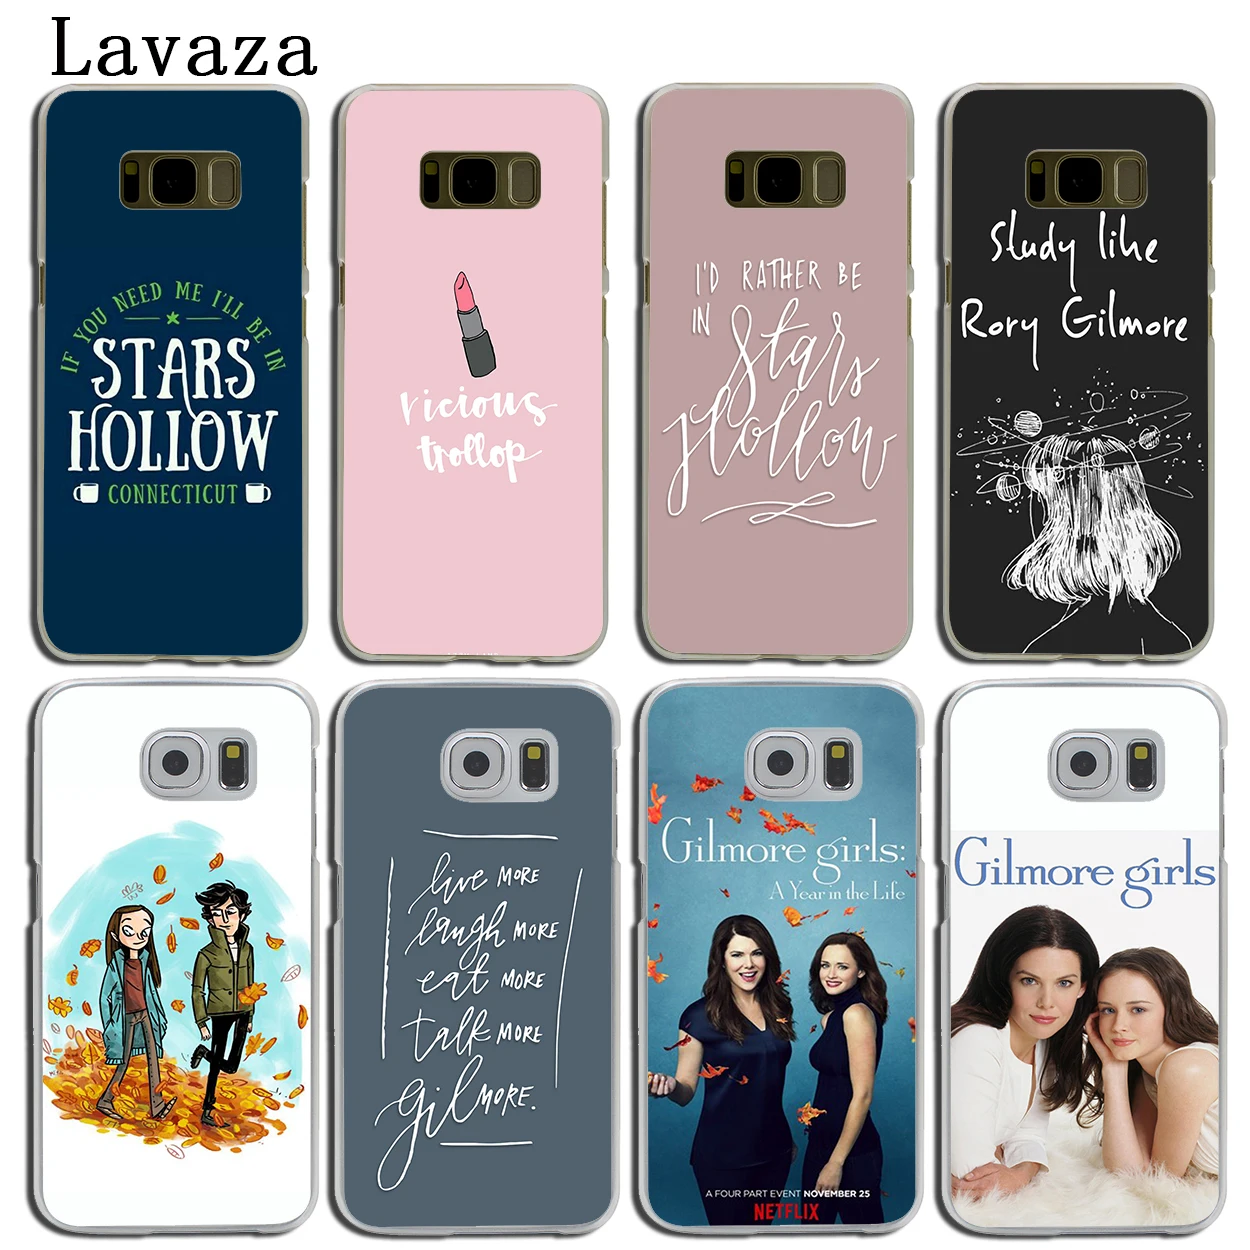 

Lavaza Gilmore Girls Rory Honorary Hard Phone Shell Case for Samsung Galaxy S8 S9 Plus S6 S7 Edge S10E S10 Plus Cover